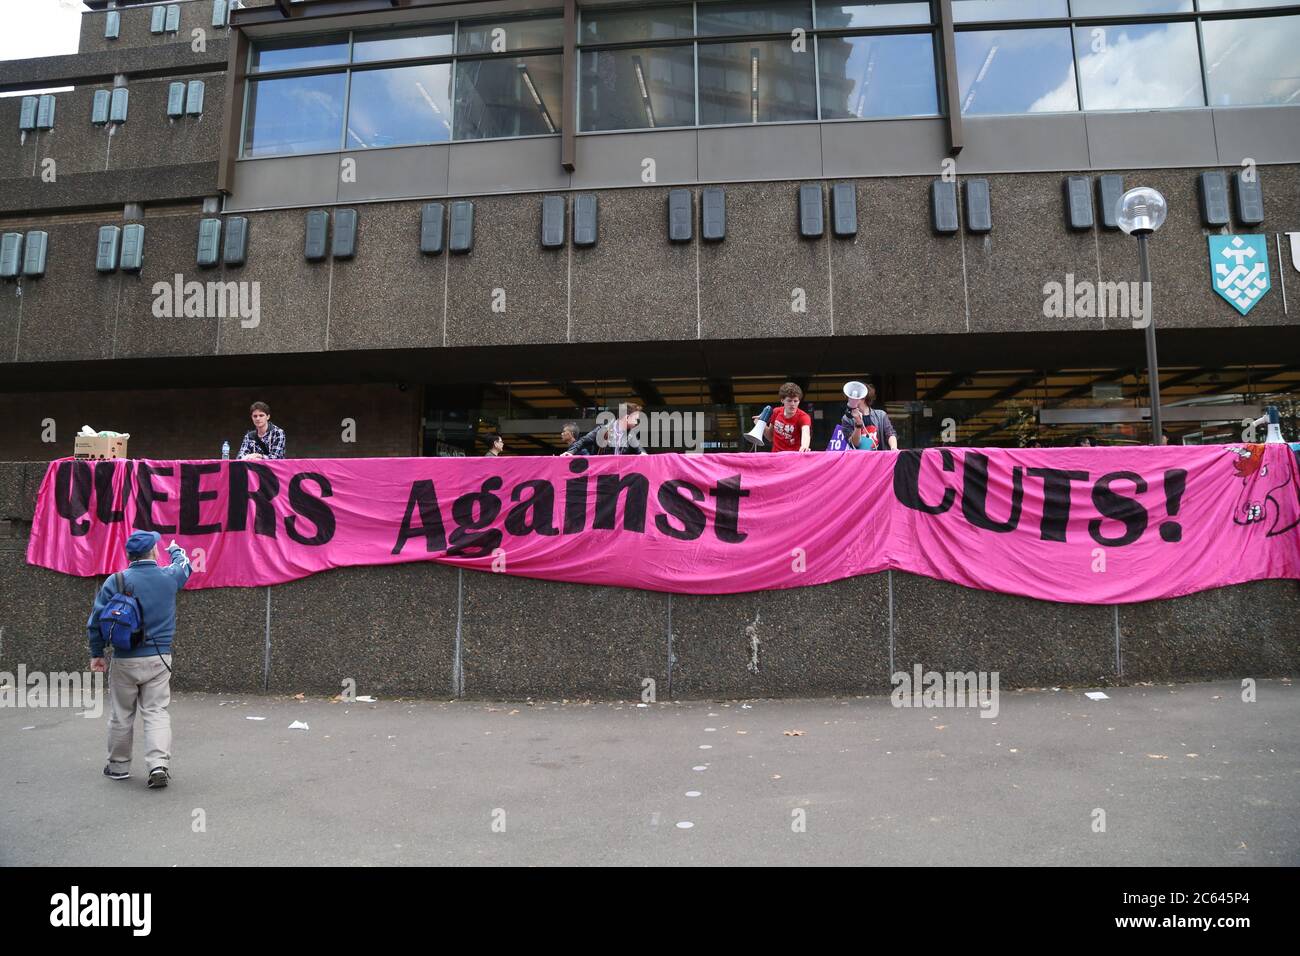 Queers protest against cuts with a long pink banner in front of the University of Technology, Sydney on Broadway. Stock Photo